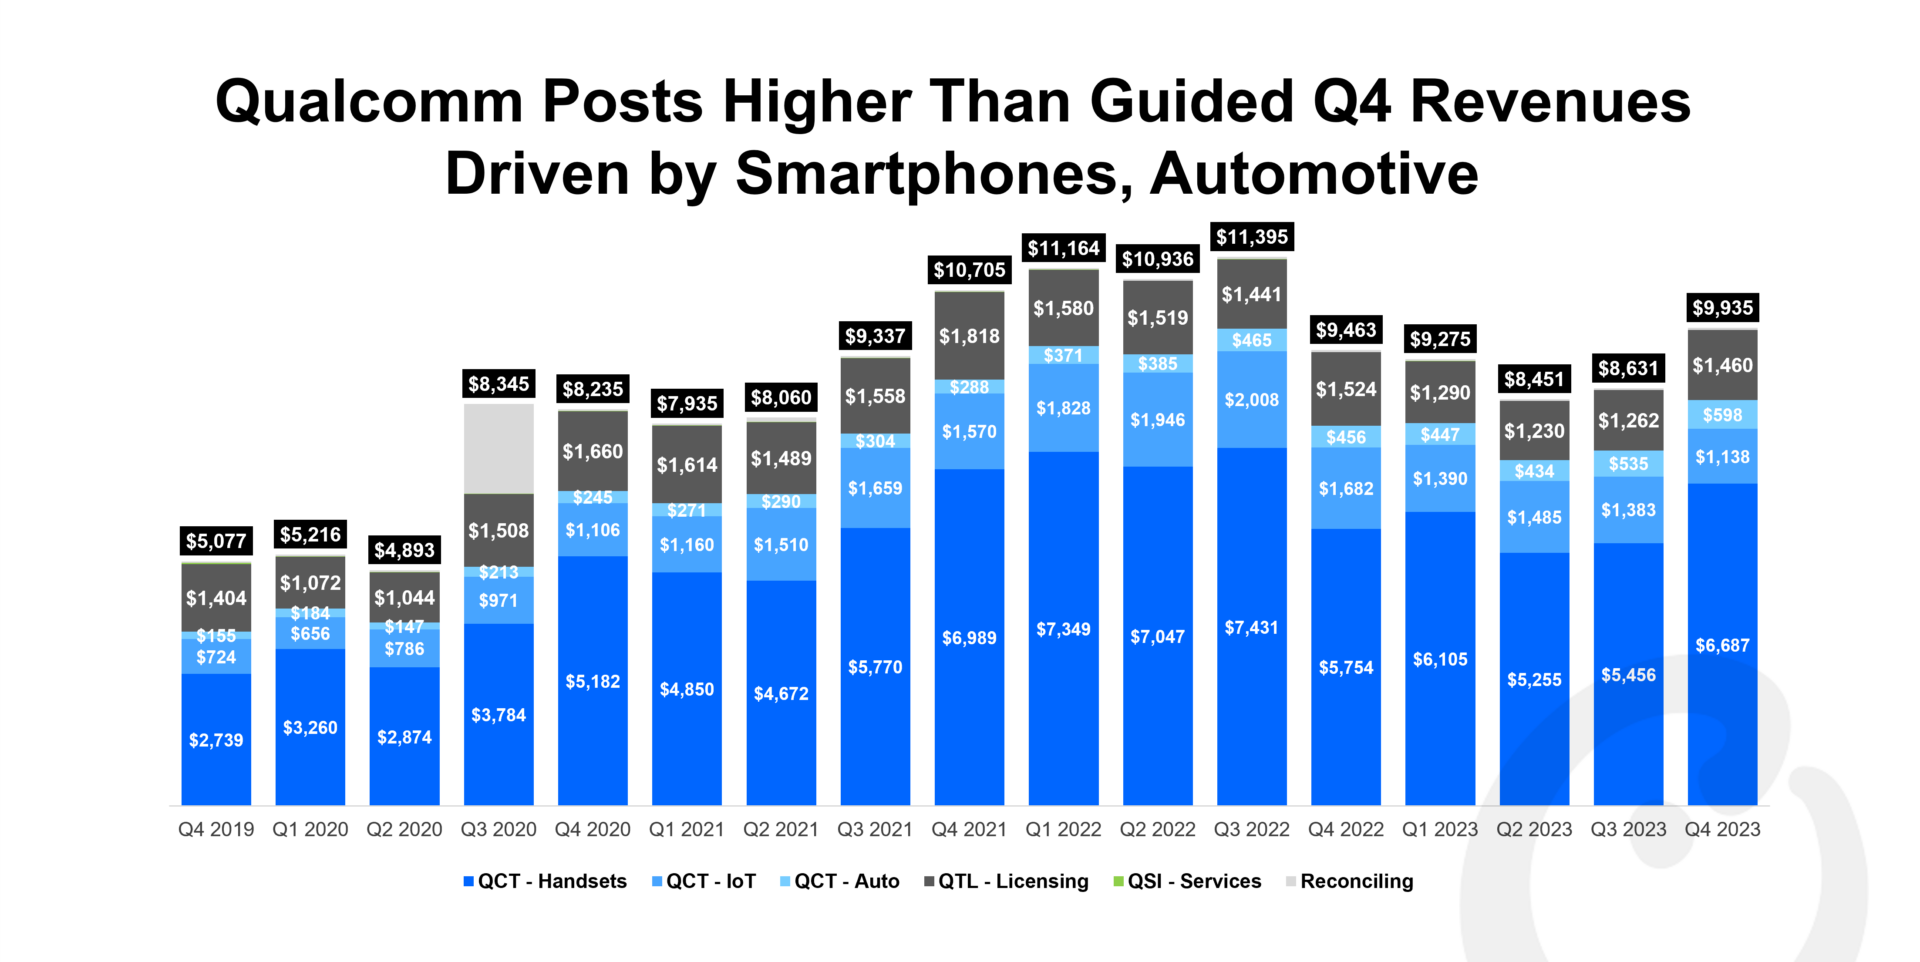 A Chart showing Qualcomm Revenues Q4 2019 to Q4 2023 (in $ Million)